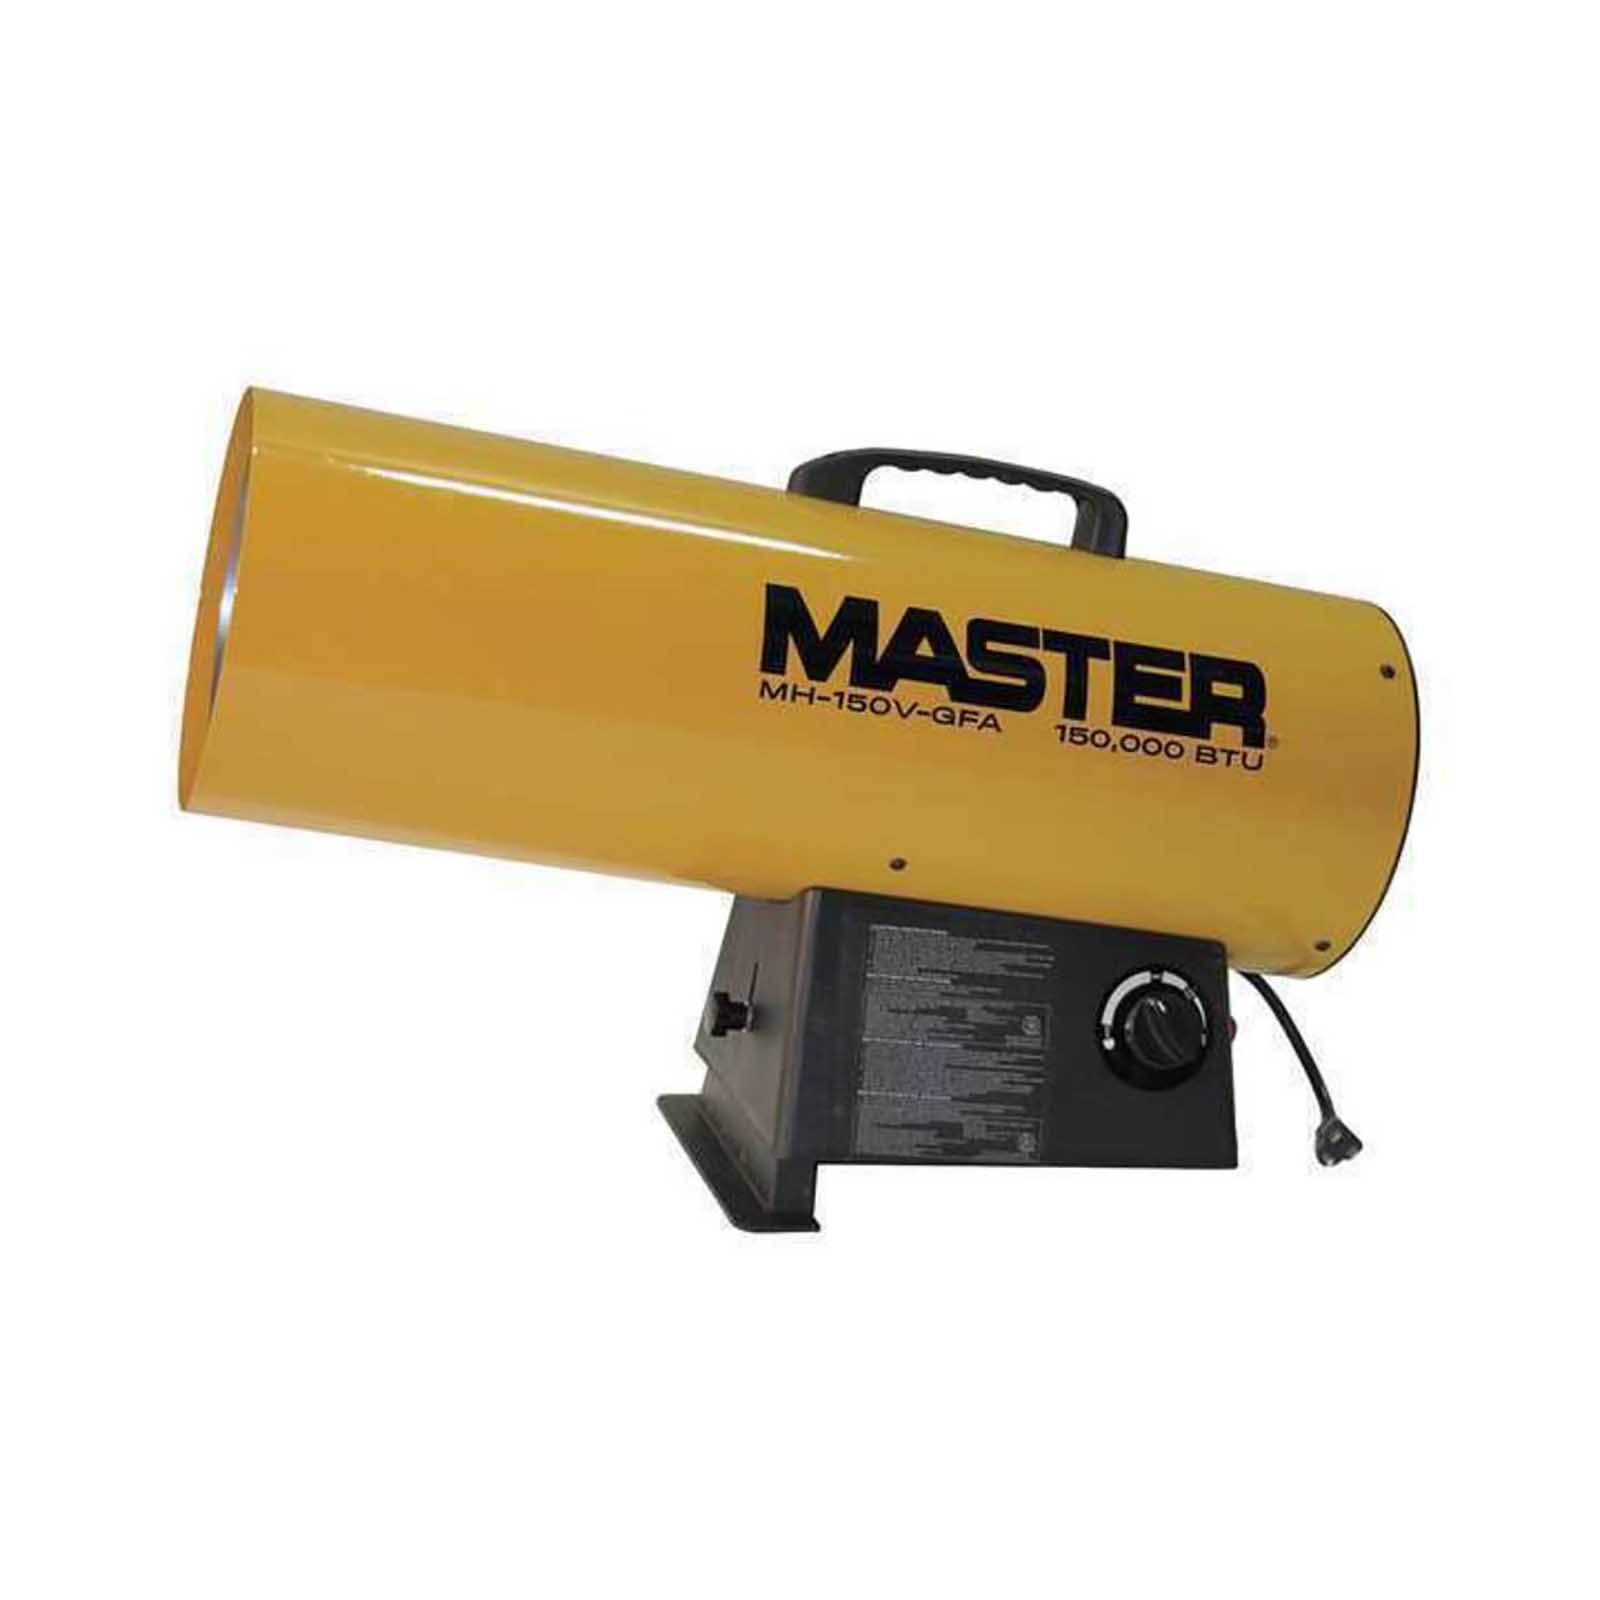 Master MH-150V-GFA-A Portable Propane Forced Air Heater w/ Variable Control